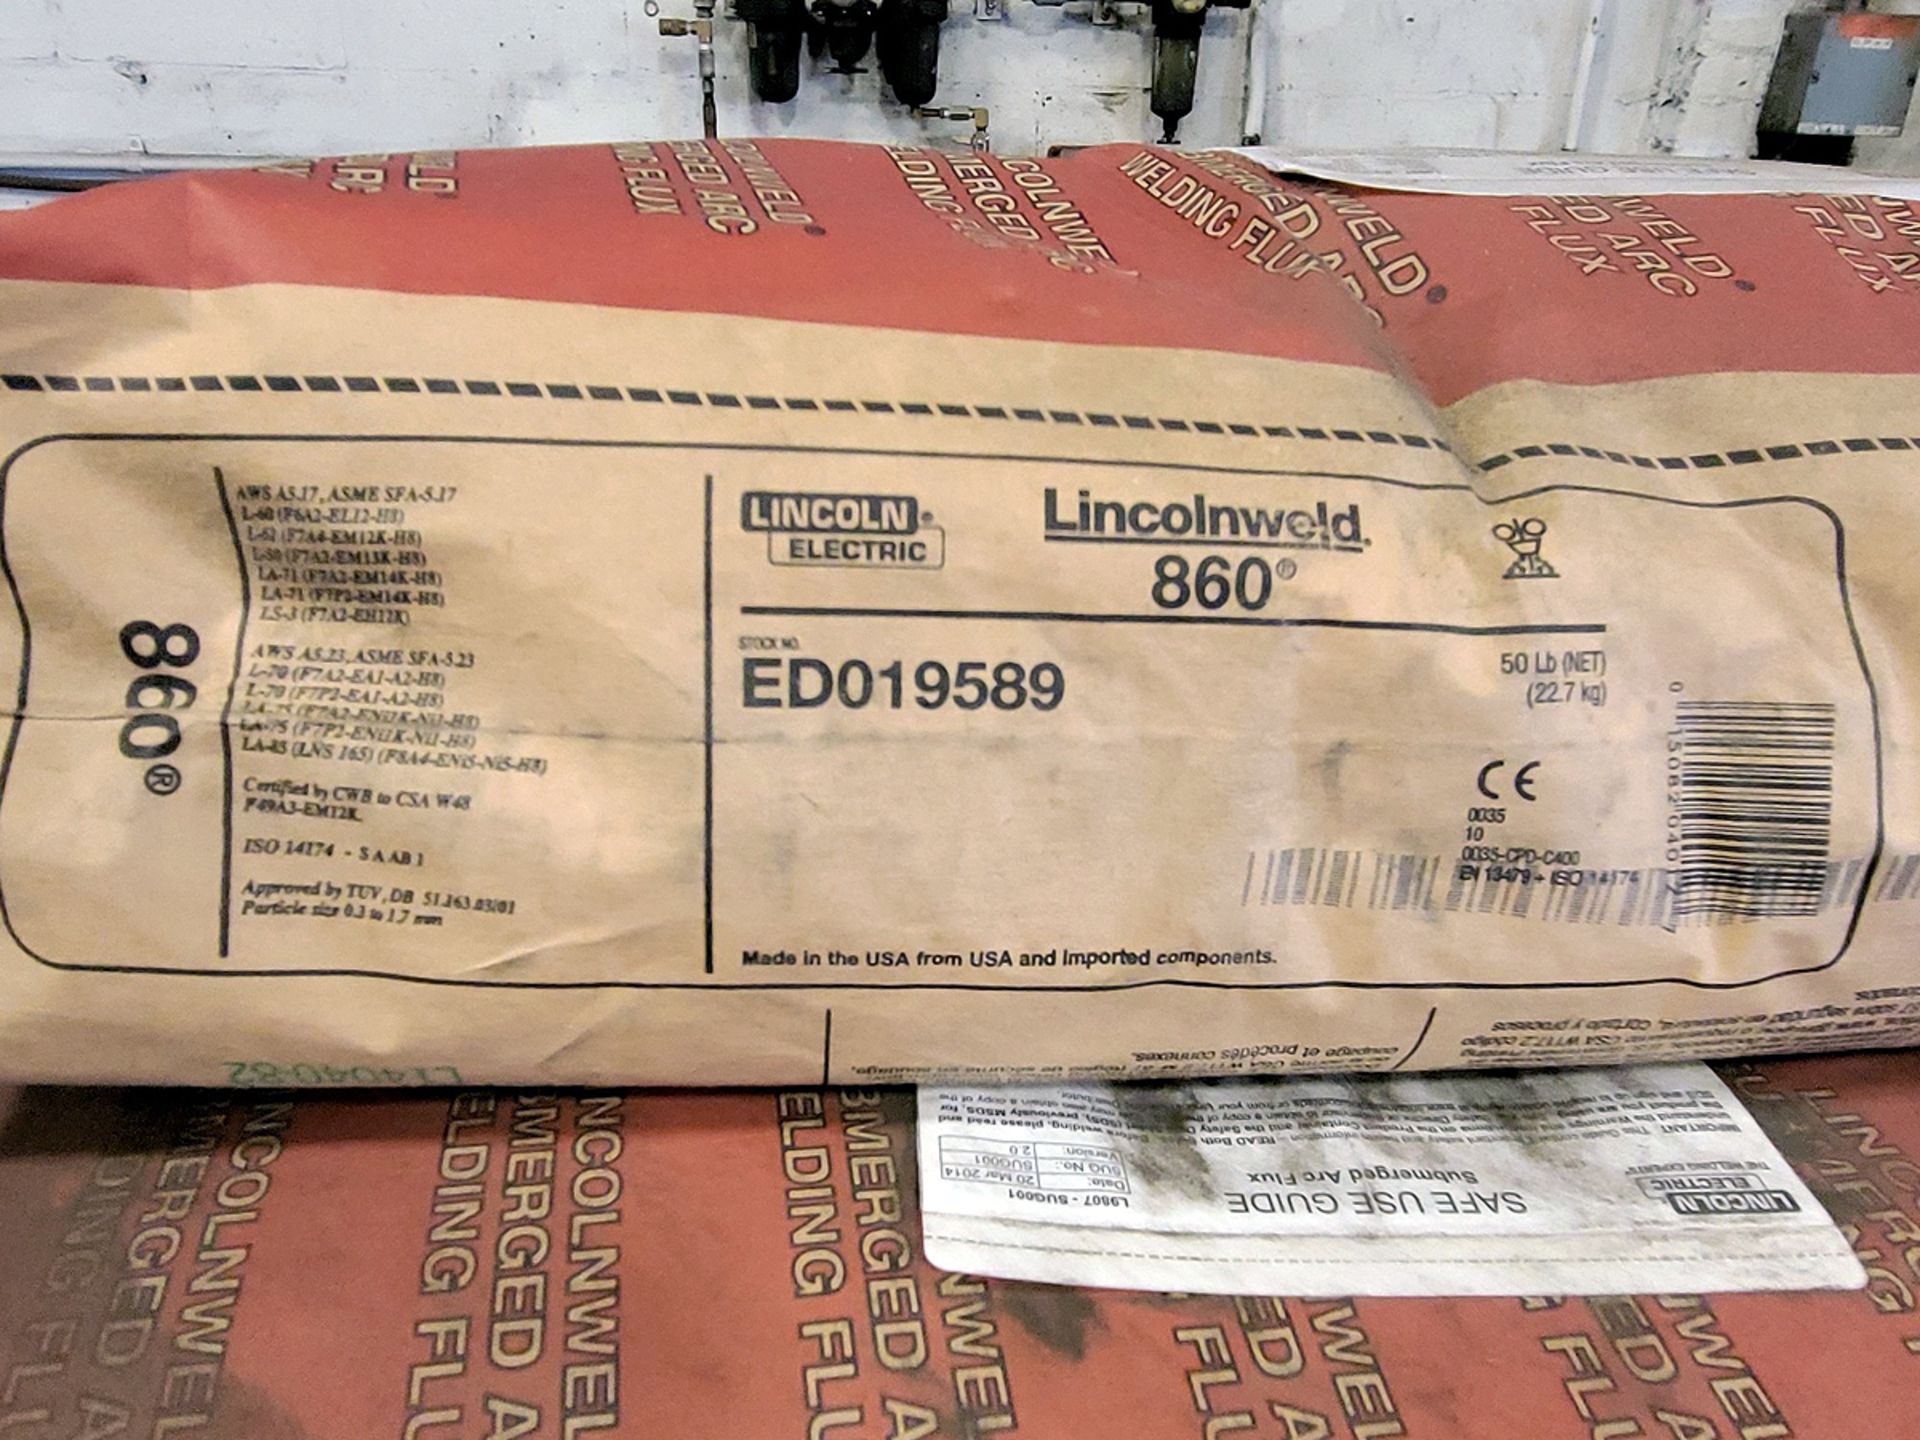 [Each] Bag of Lincoln Electric ED019589 LincolnWeld 860 (50Lbs.) - Image 2 of 2